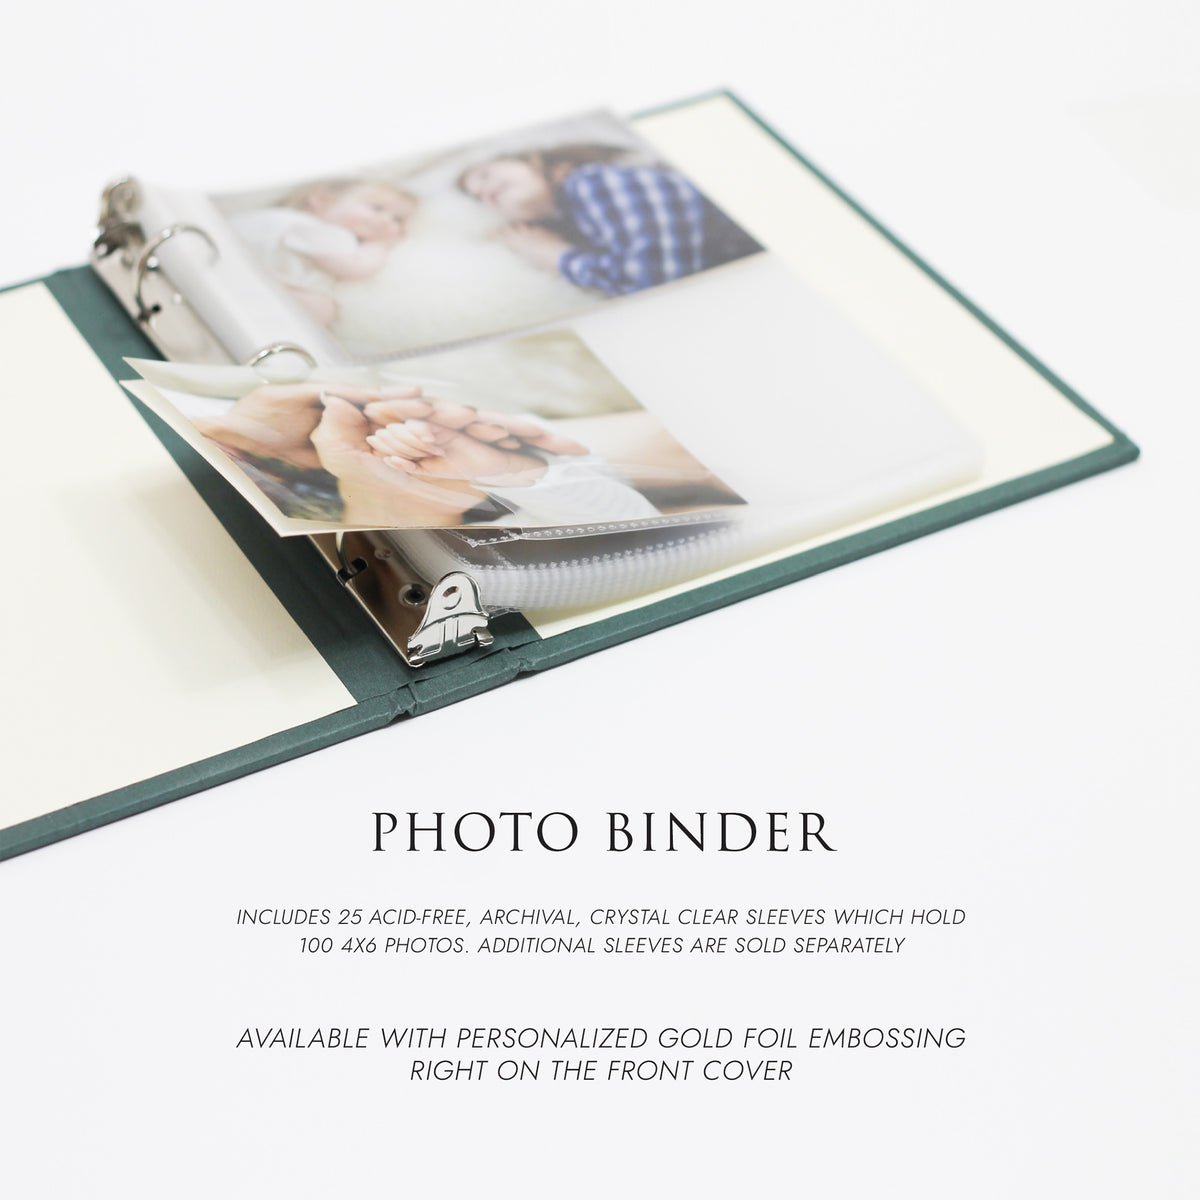 Medium Photo Binder For 4x6 Photos | Cover: Dove Gray Linen | Available Personalized